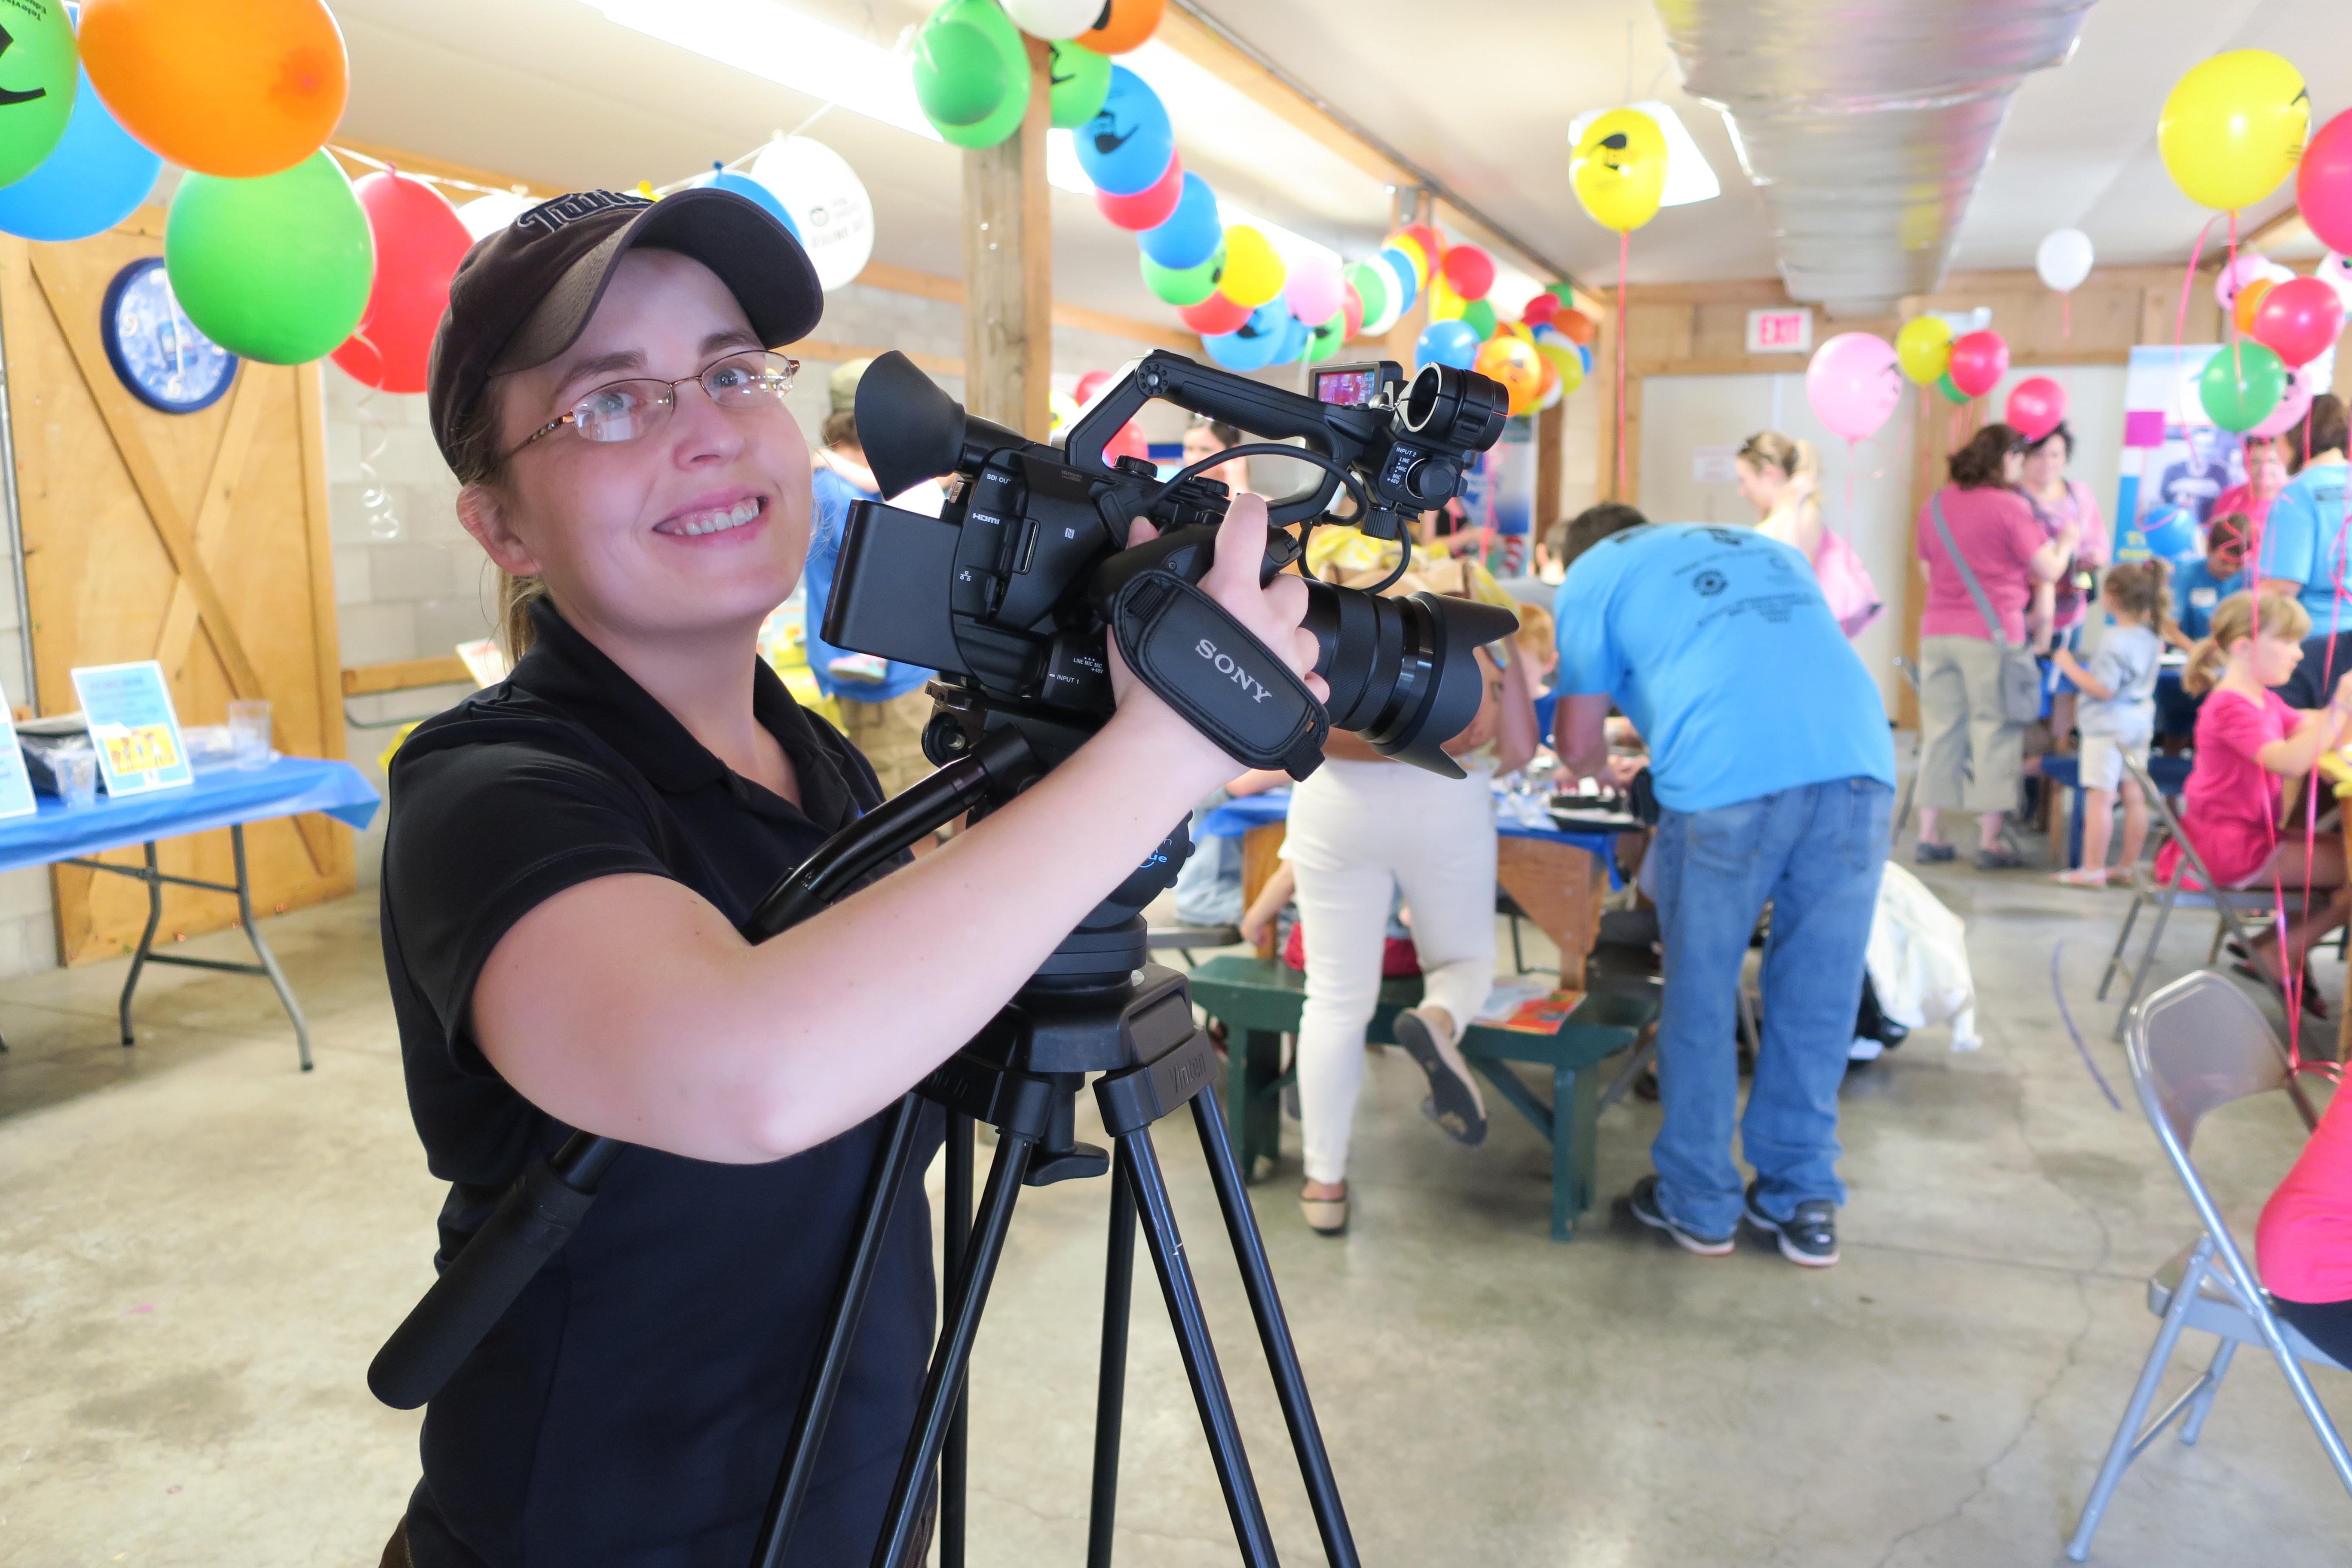 Videographer with camera at childrens' event